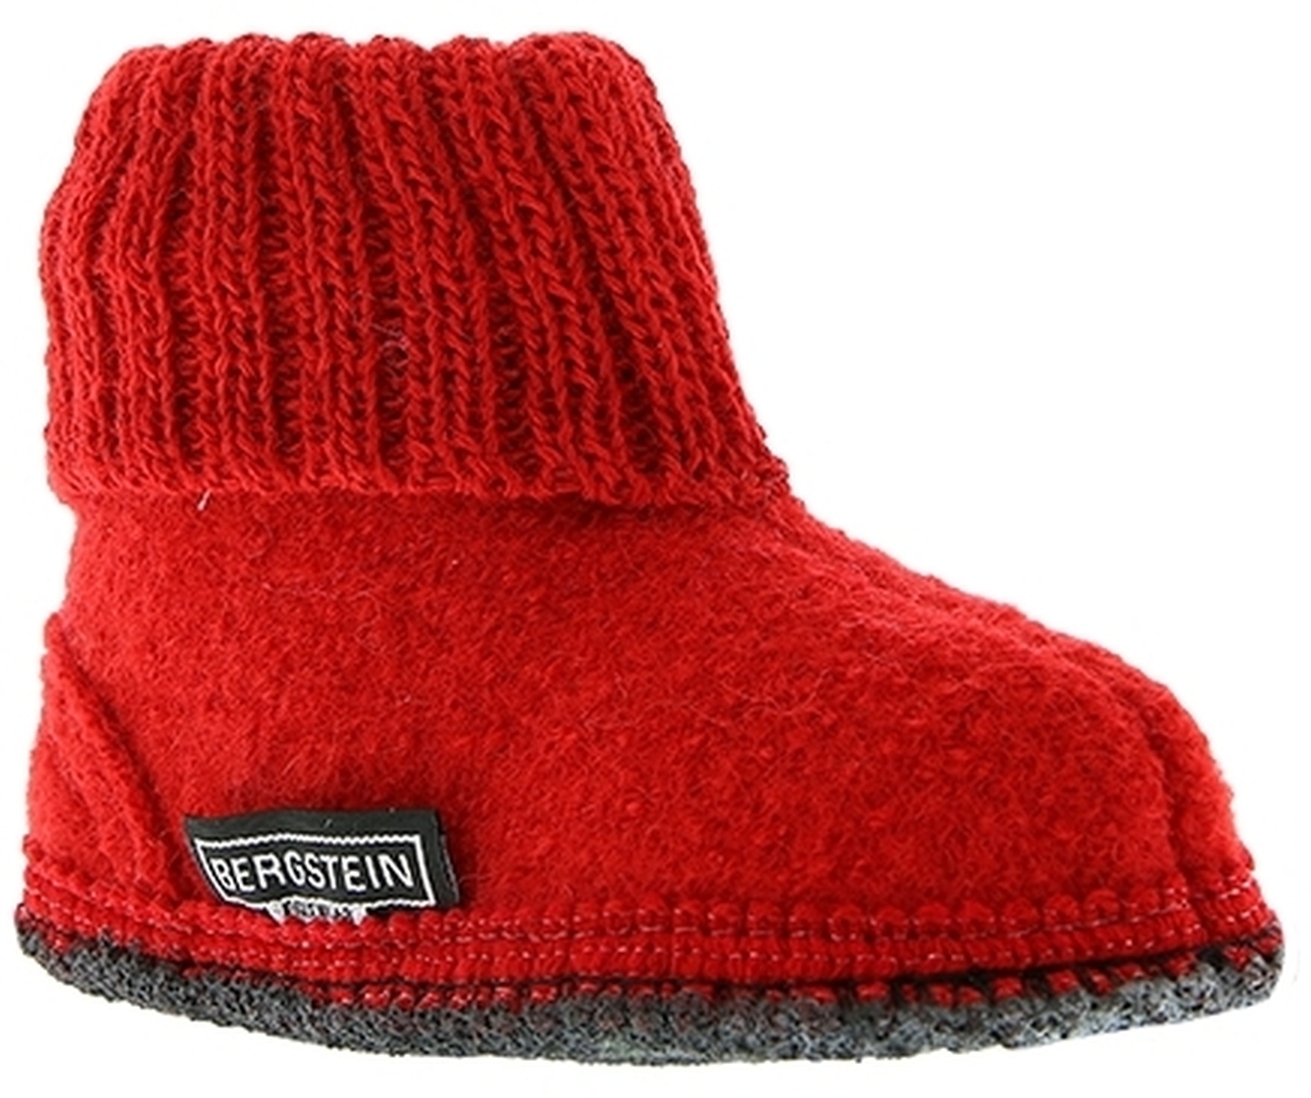 Bergstein Cozy Rot Wolle